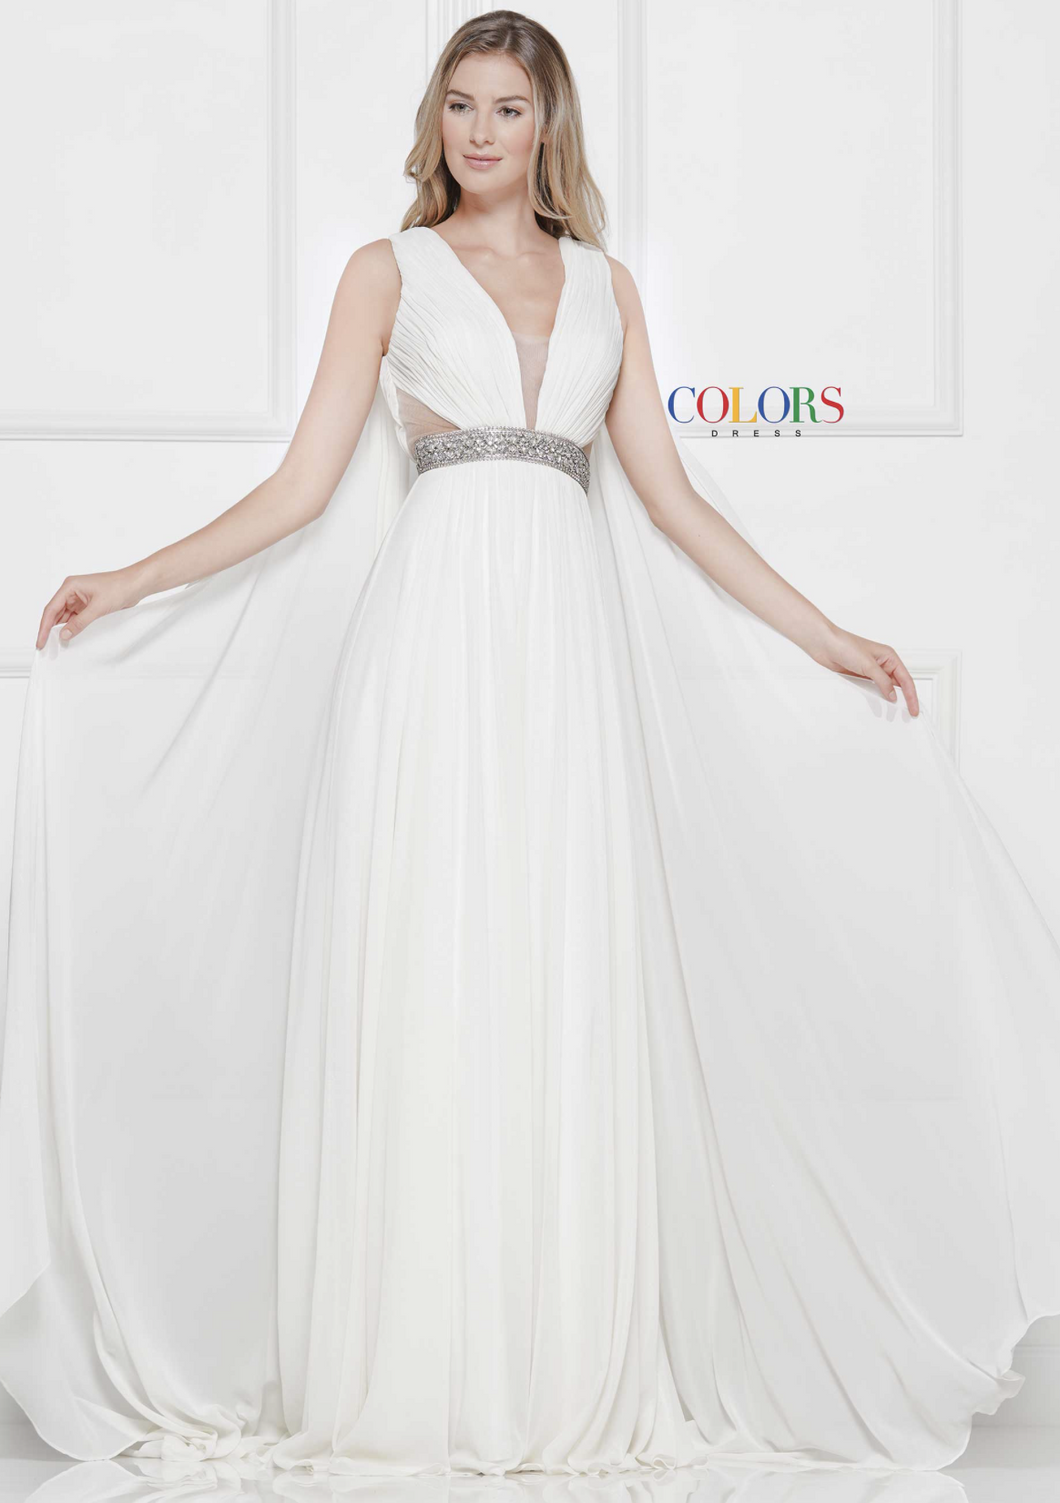 Colors Spring 2019 style 2083